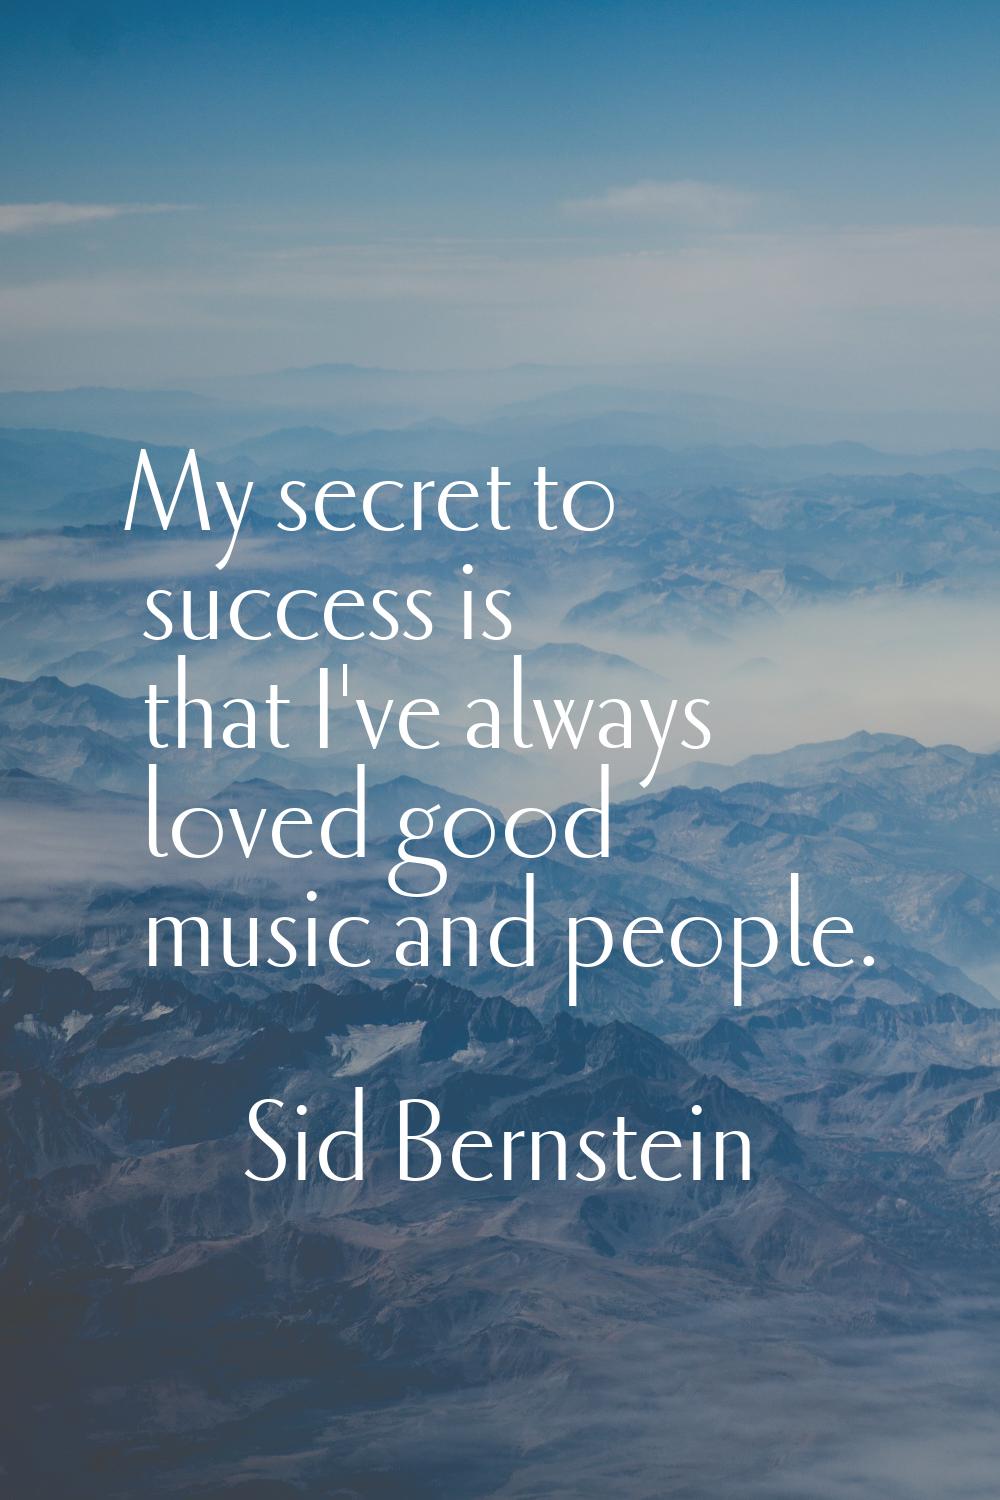 My secret to success is that I've always loved good music and people.